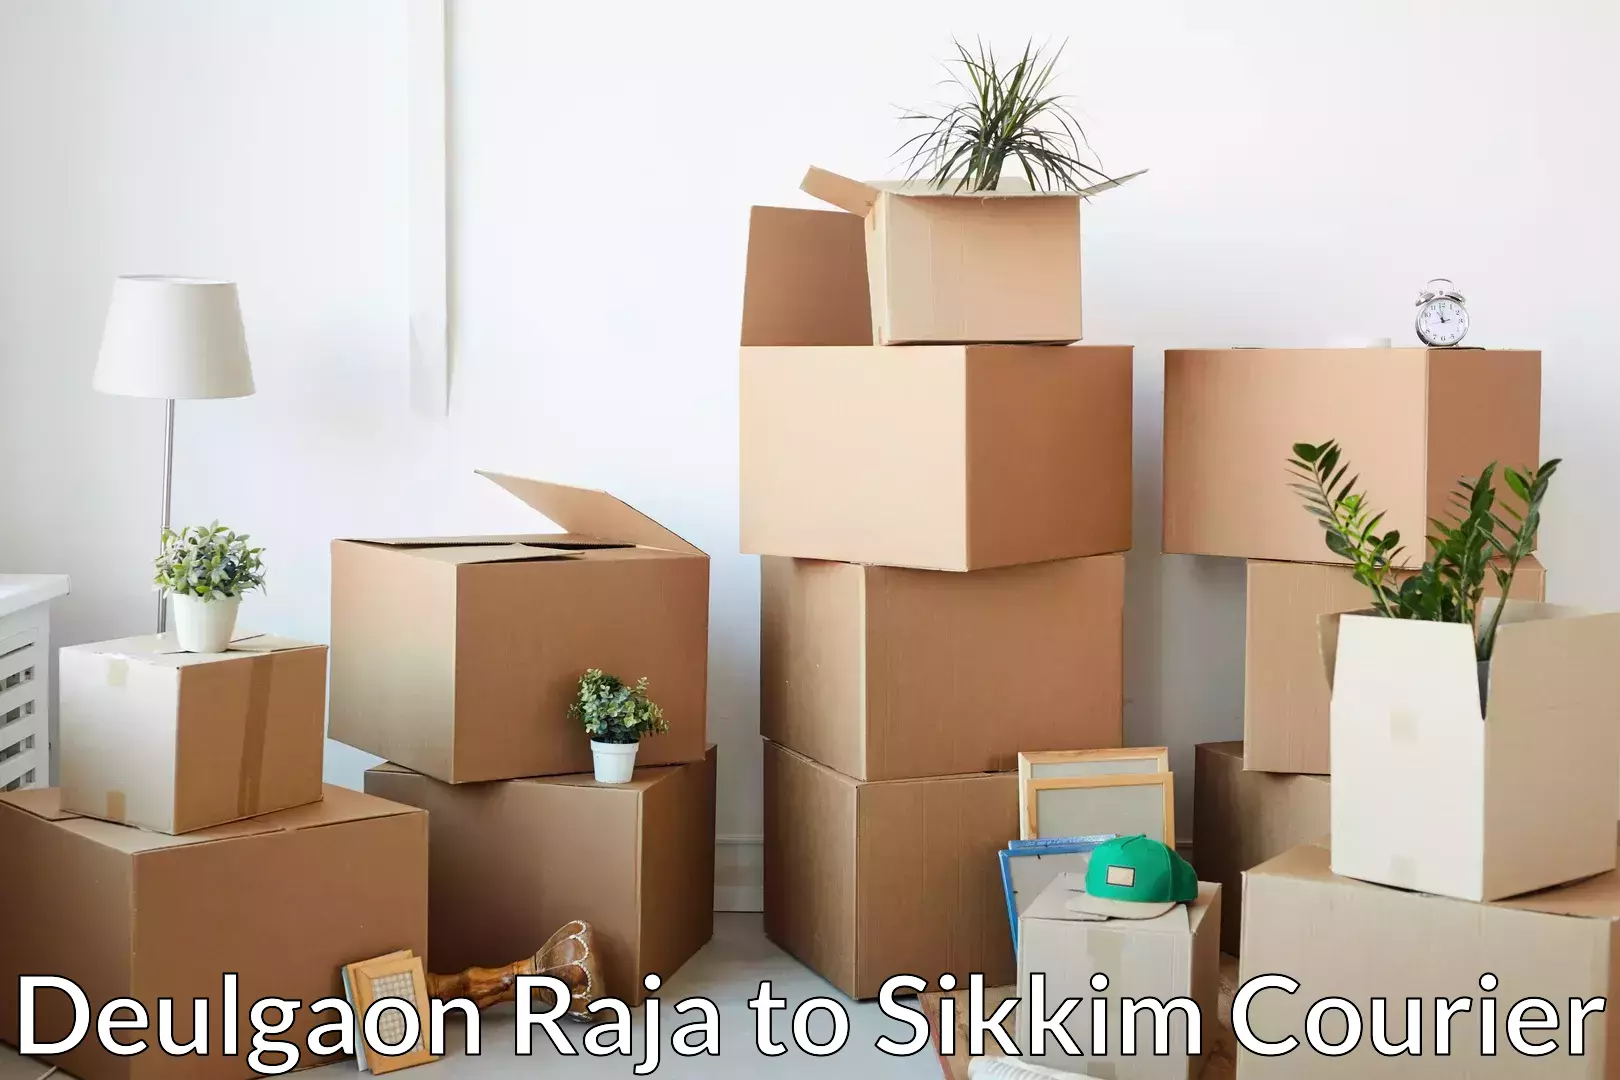 Full-service relocation in Deulgaon Raja to South Sikkim